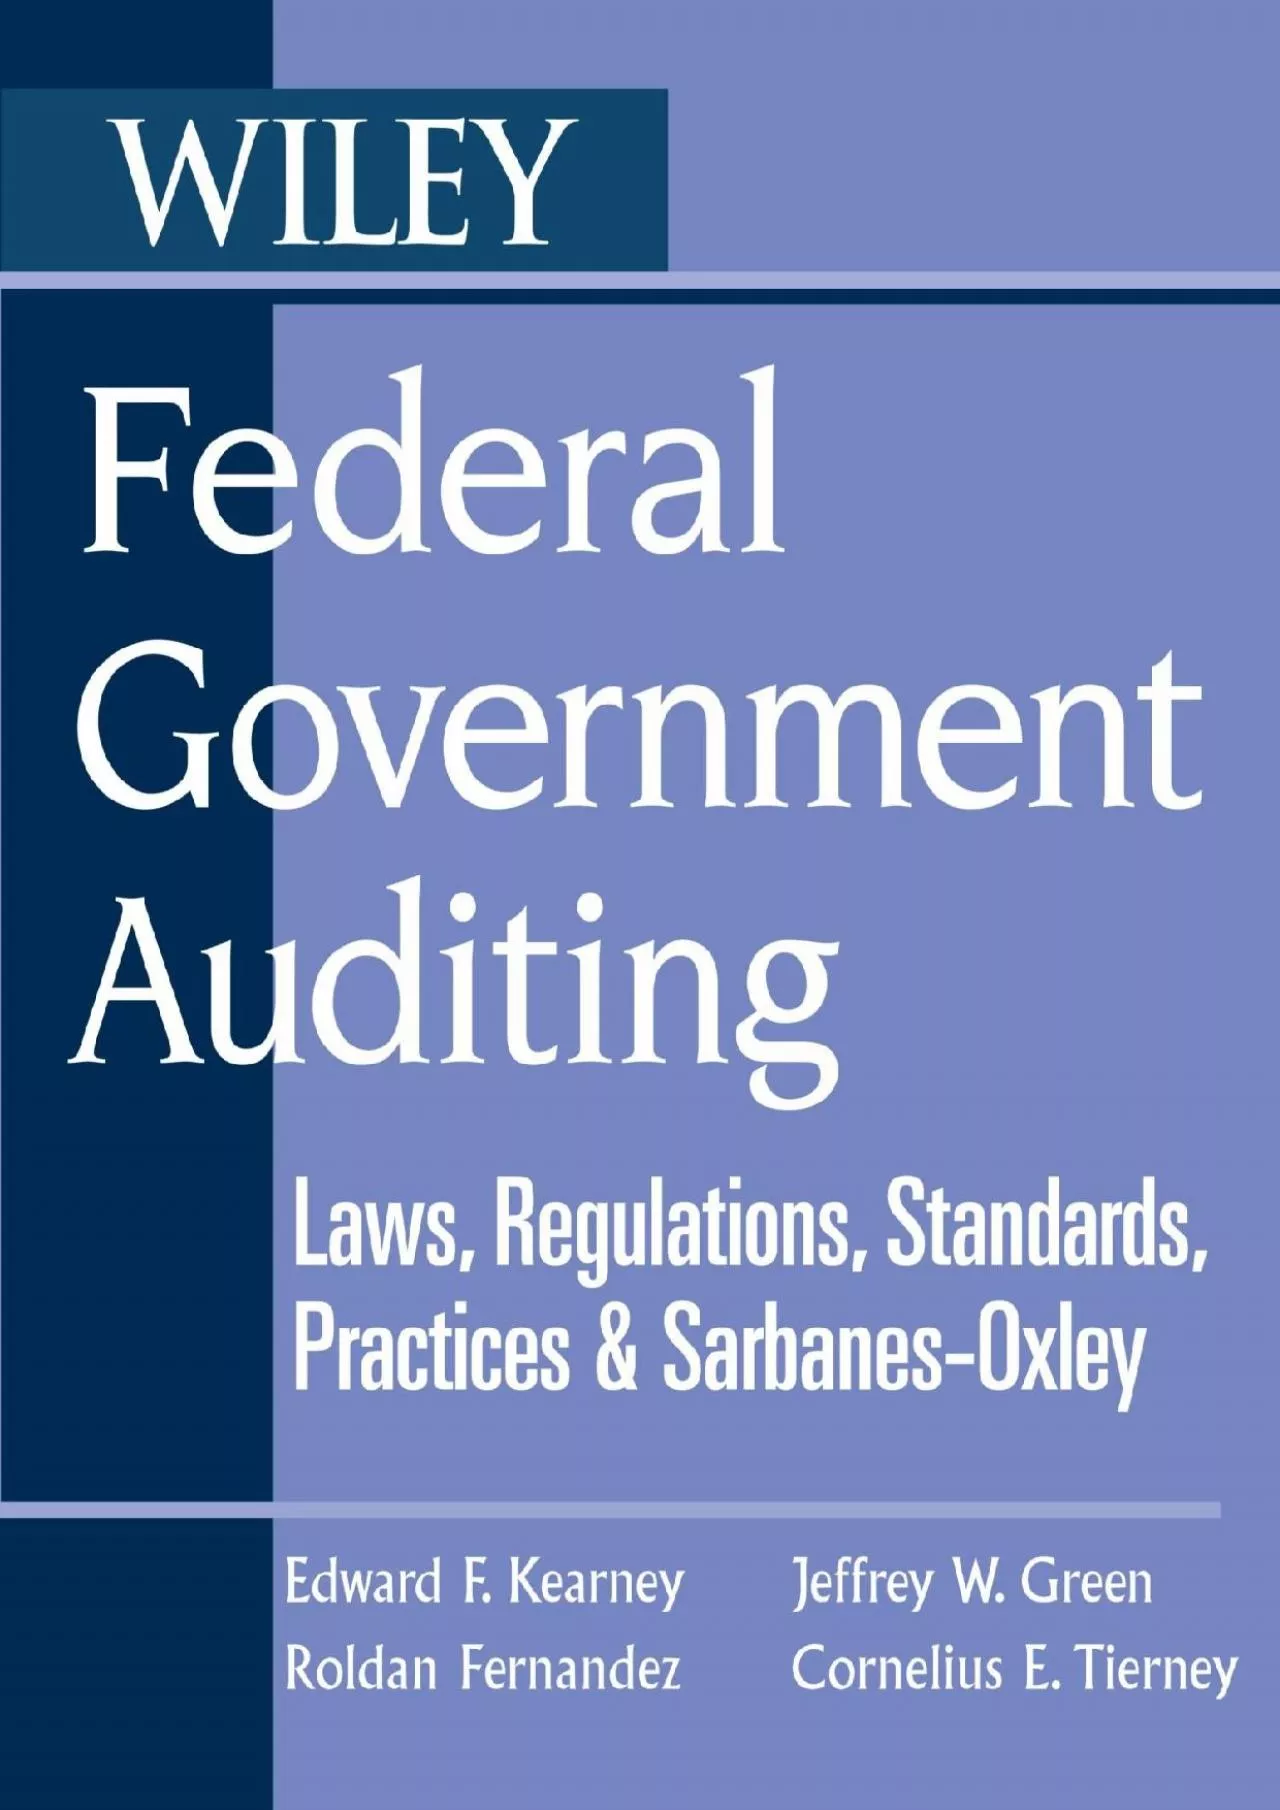 Federal Government Auditing: Laws Regulations Standards Practices & Sarbanes-Oxley